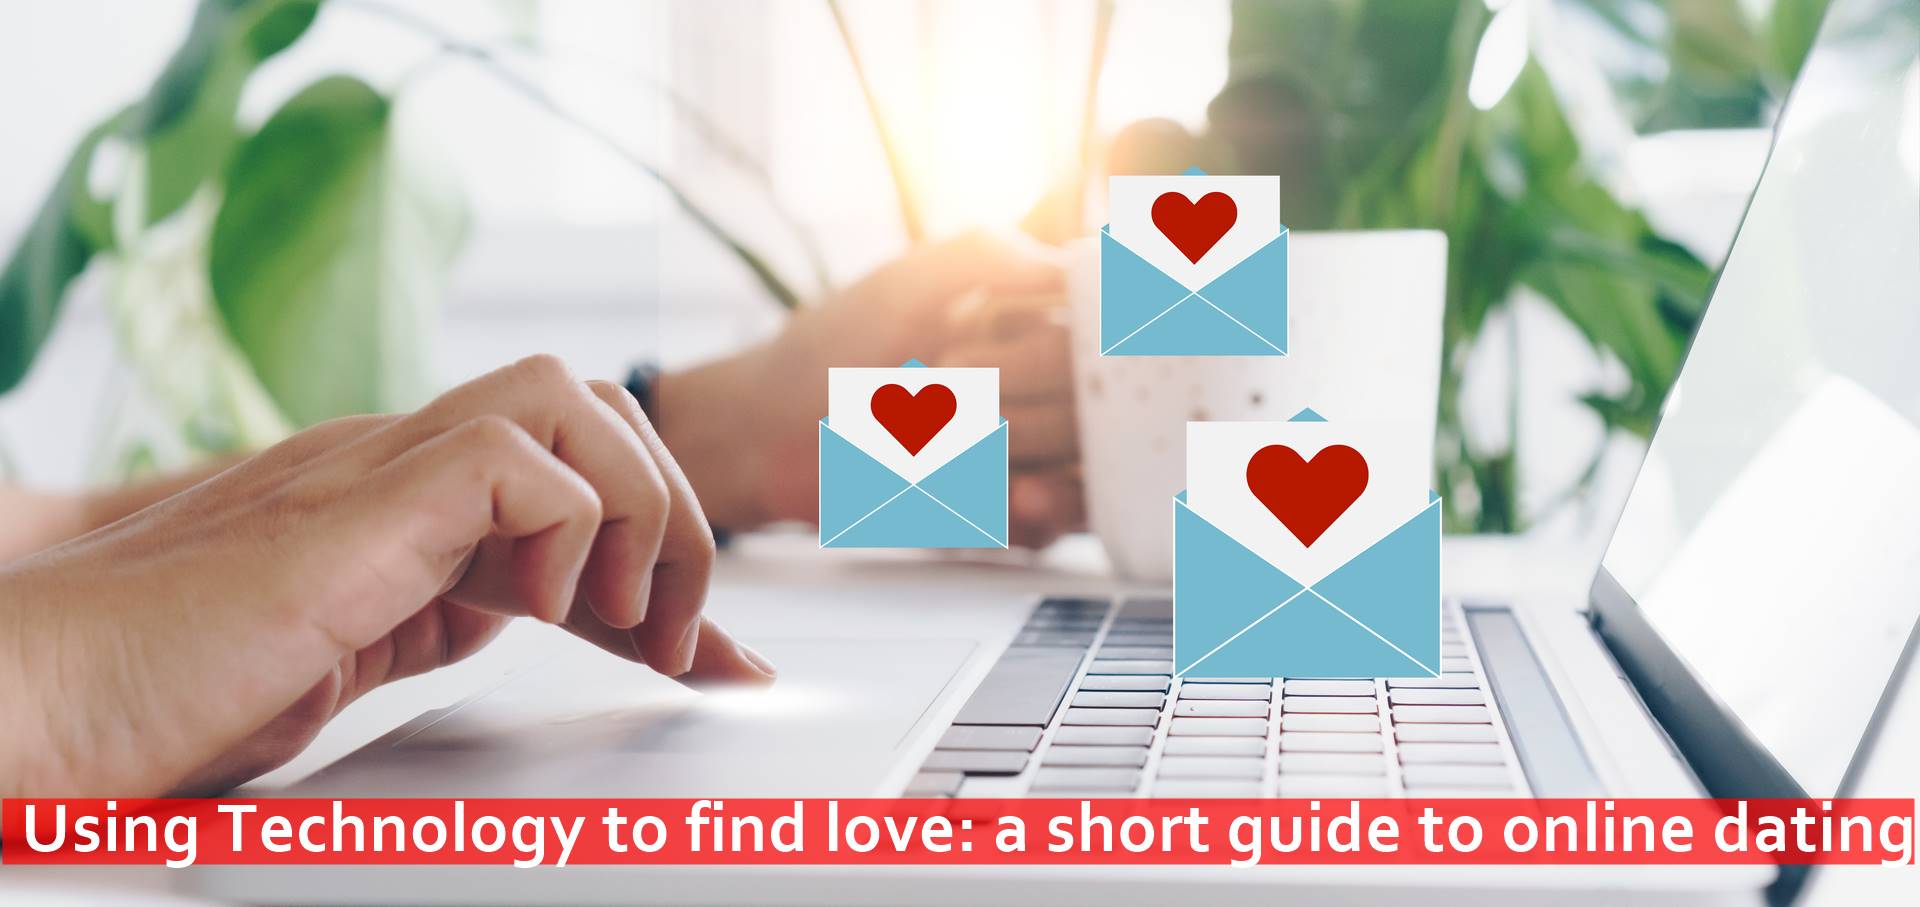 Using Technology to find love: a short guide to online dating